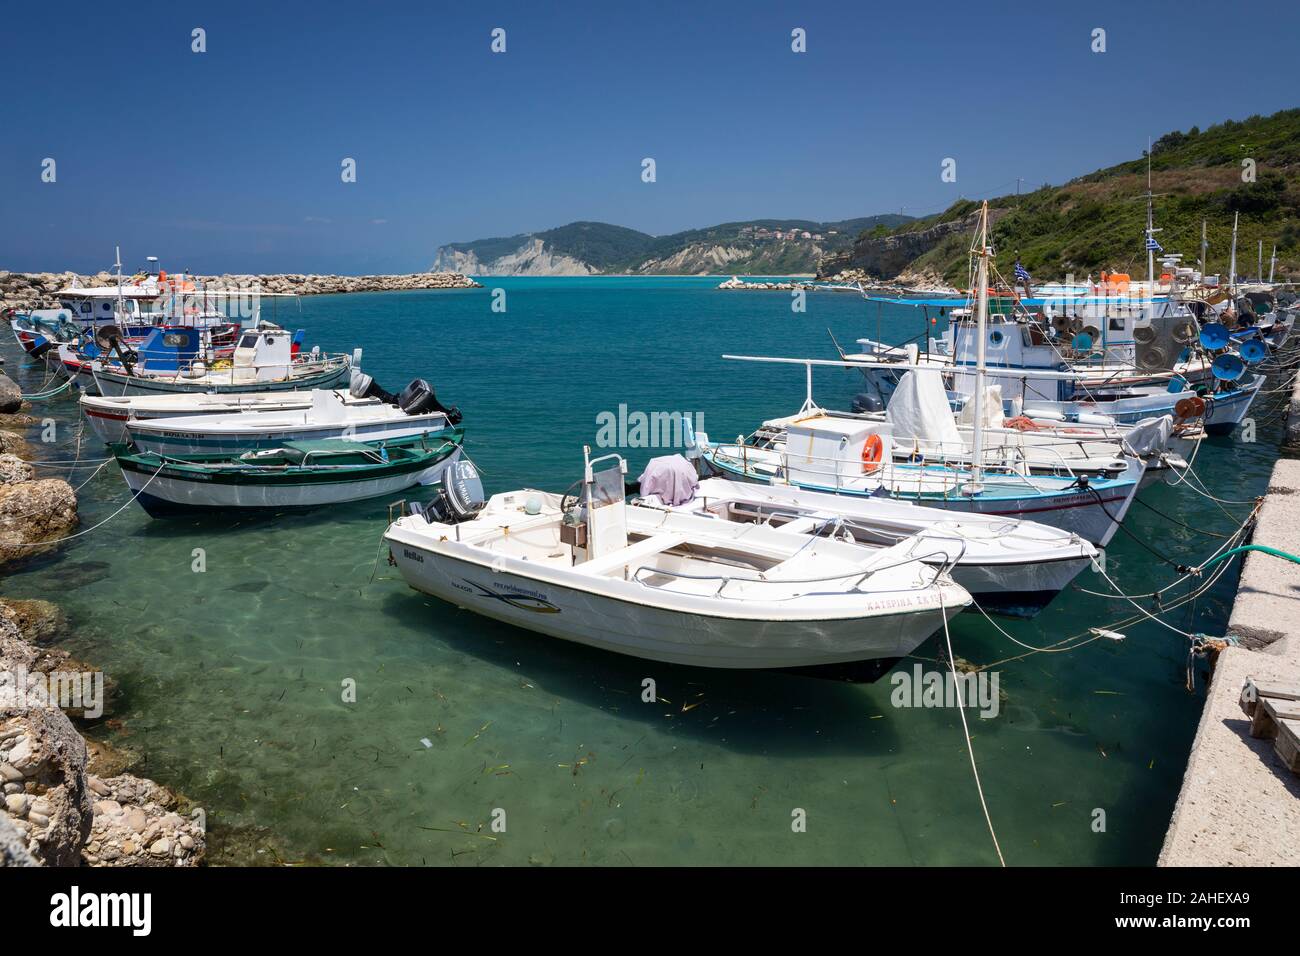 Boats moored at Agios Stefanos in North West Corfu, Greece Stock Photo